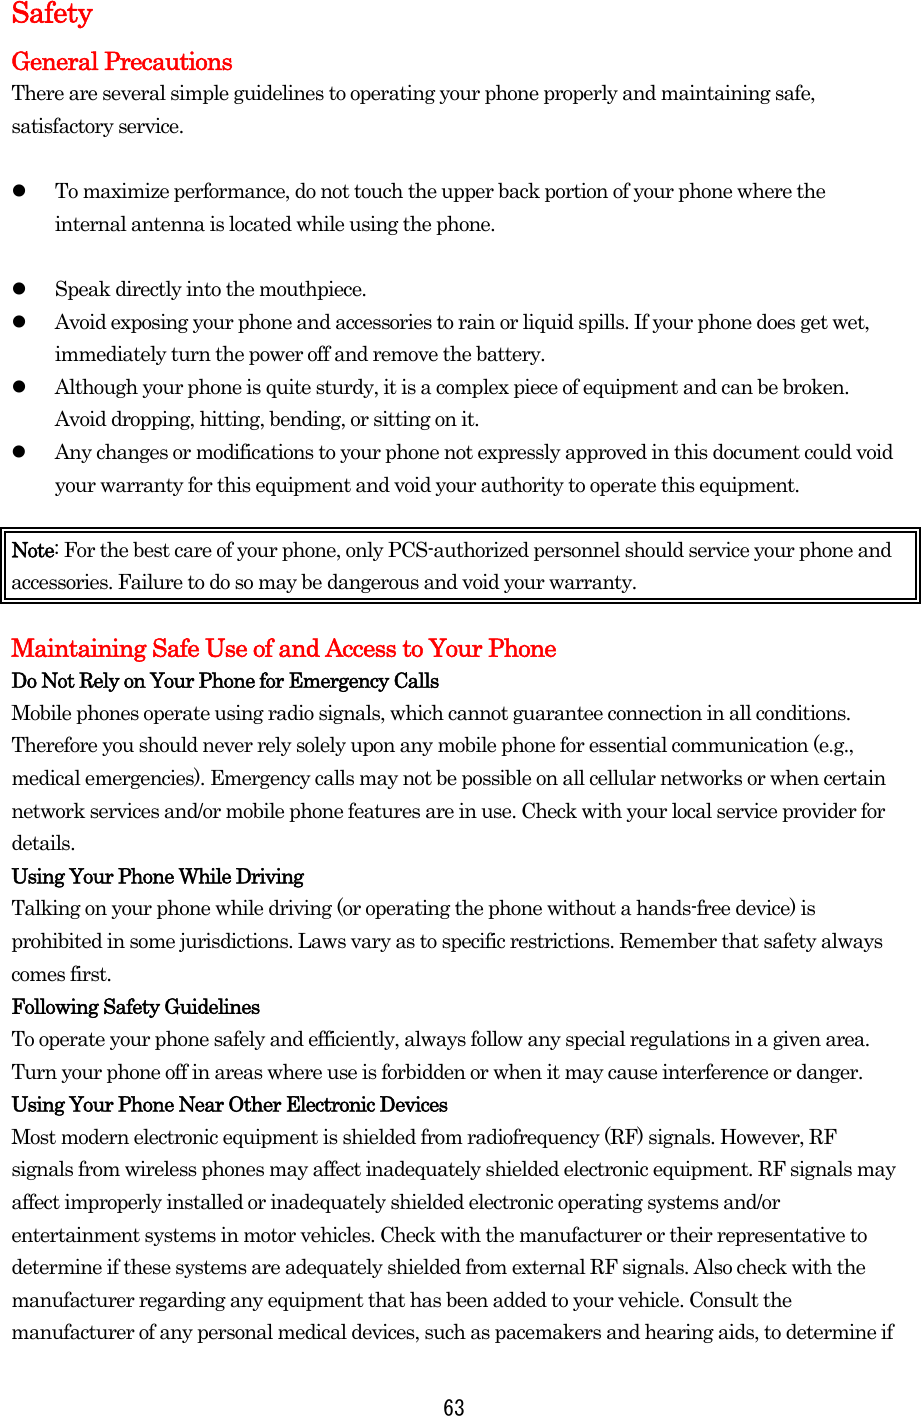  63Safety General Precautions There are several simple guidelines to operating your phone properly and maintaining safe, satisfactory service.      To maximize performance, do not touch the upper back portion of your phone where the internal antenna is located while using the phone.    Speak directly into the mouthpiece.     Avoid exposing your phone and accessories to rain or liquid spills. If your phone does get wet, immediately turn the power off and remove the battery.     Although your phone is quite sturdy, it is a complex piece of equipment and can be broken. Avoid dropping, hitting, bending, or sitting on it.     Any changes or modifications to your phone not expressly approved in this document could void your warranty for this equipment and void your authority to operate this equipment.  Note: For the best care of your phone, only PCS-authorized personnel should service your phone and accessories. Failure to do so may be dangerous and void your warranty.  Maintaining Safe Use of and Access to Your Phone Do Not Rely on Your Phone for Emergency Calls Mobile phones operate using radio signals, which cannot guarantee connection in all conditions. Therefore you should never rely solely upon any mobile phone for essential communication (e.g., medical emergencies). Emergency calls may not be possible on all cellular networks or when certain network services and/or mobile phone features are in use. Check with your local service provider for details. Using Your Phone While Driving Talking on your phone while driving (or operating the phone without a hands-free device) is prohibited in some jurisdictions. Laws vary as to specific restrictions. Remember that safety always comes first. Following Safety Guidelines To operate your phone safely and efficiently, always follow any special regulations in a given area. Turn your phone off in areas where use is forbidden or when it may cause interference or danger. Using Your Phone Near Other Electronic Devices Most modern electronic equipment is shielded from radiofrequency (RF) signals. However, RF signals from wireless phones may affect inadequately shielded electronic equipment. RF signals may affect improperly installed or inadequately shielded electronic operating systems and/or entertainment systems in motor vehicles. Check with the manufacturer or their representative to determine if these systems are adequately shielded from external RF signals. Also check with the manufacturer regarding any equipment that has been added to your vehicle. Consult the manufacturer of any personal medical devices, such as pacemakers and hearing aids, to determine if 